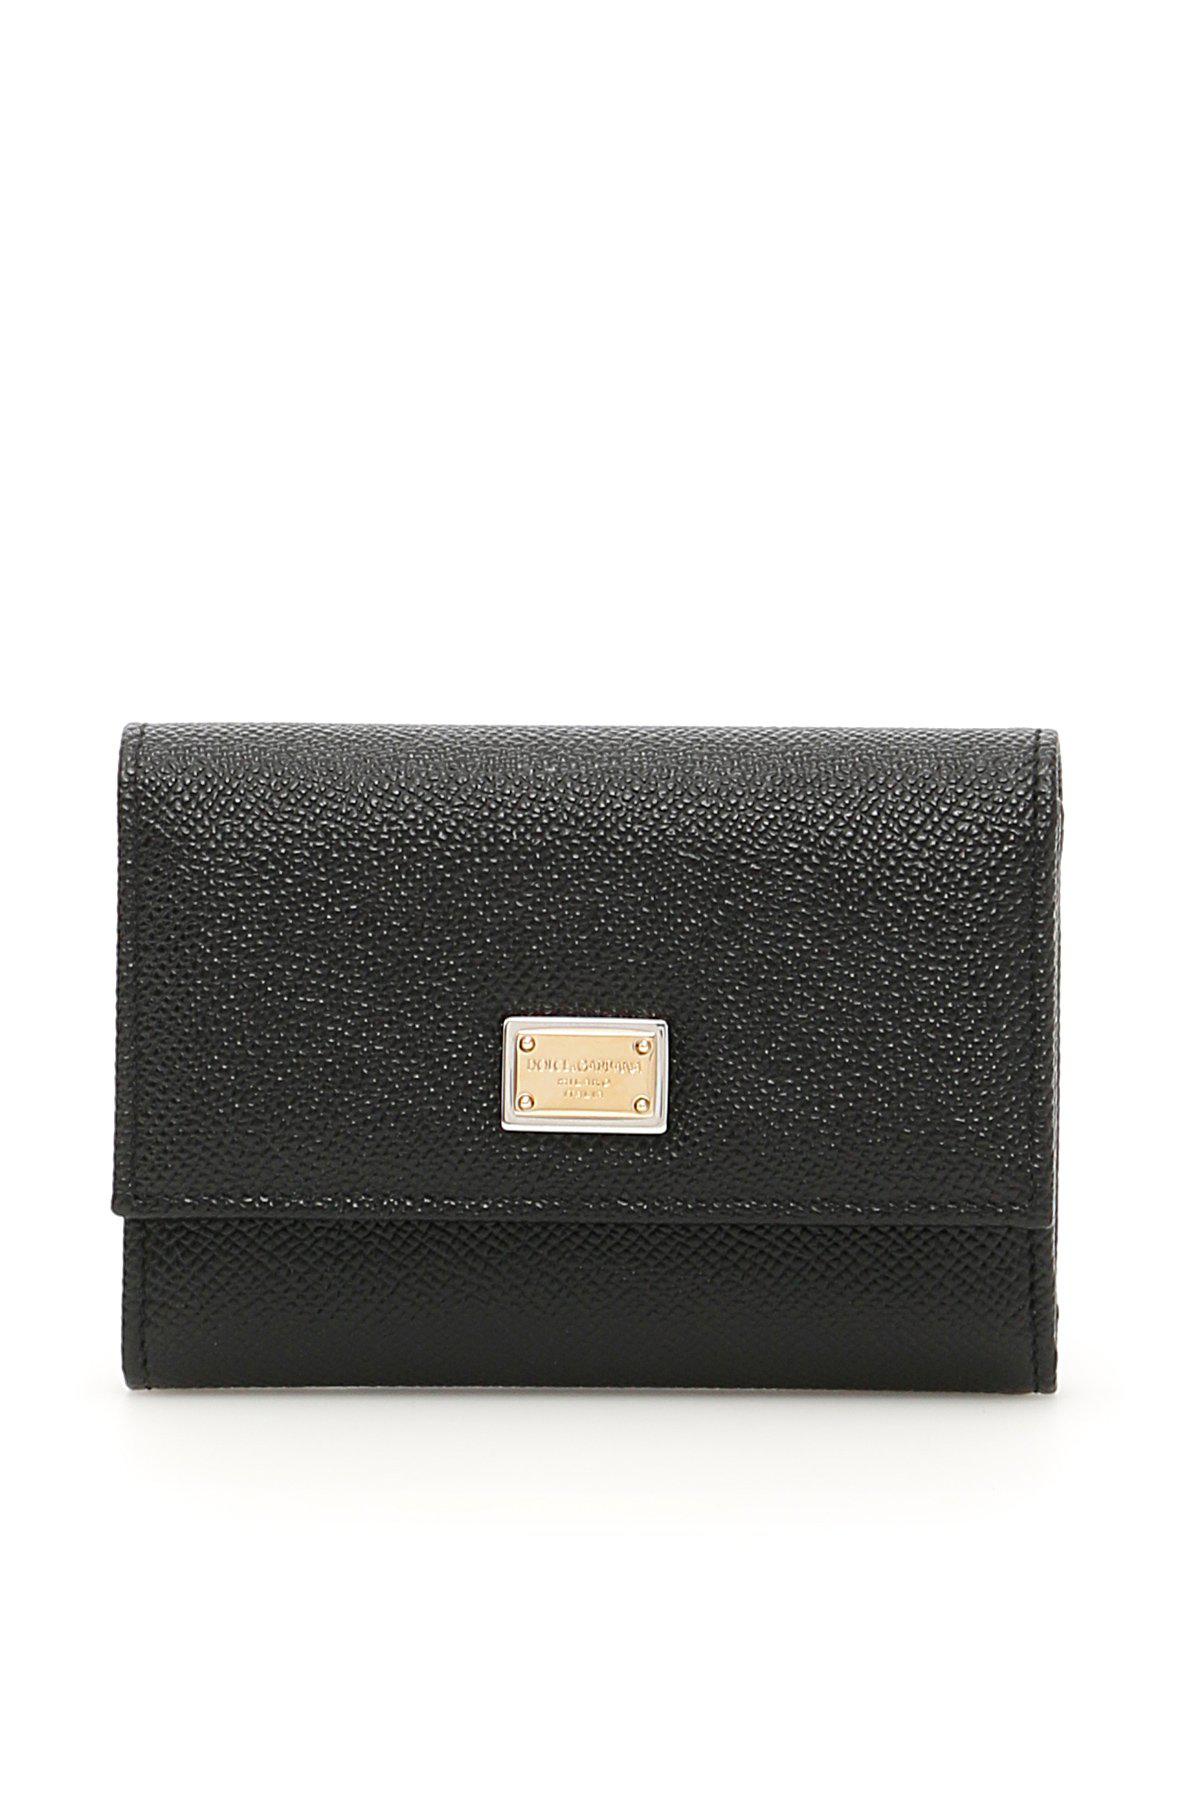 Dolce & Gabbana Dauphine Leather Wallet in Black - Lyst